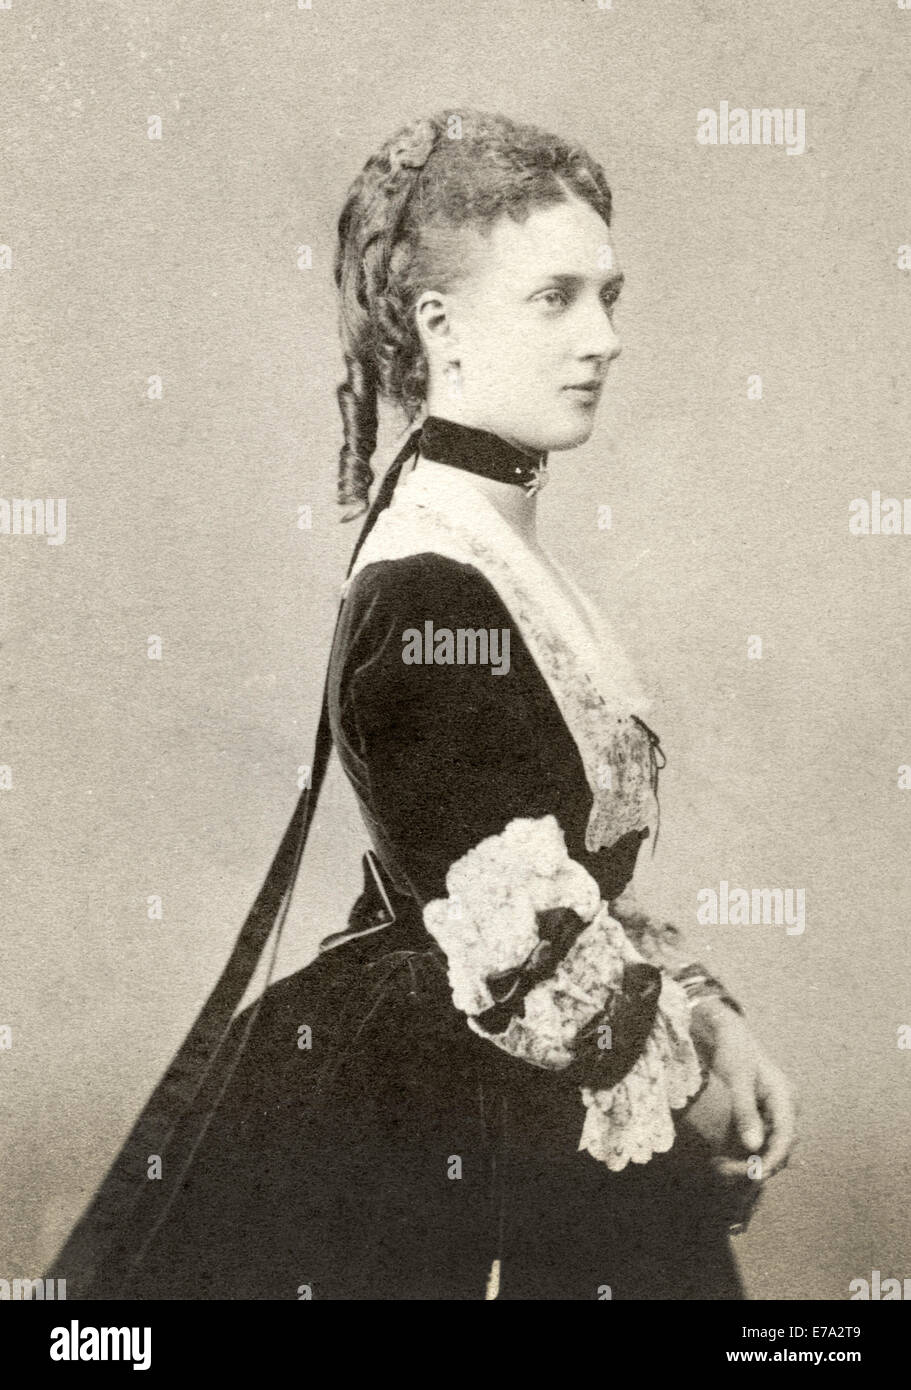 Alexandra of Denmark (1844-1925), Queen Consort of United Kingdom and Empress of India as Wife of King Edward VII, Portrait as Princess of Wales, circa 1865 Stock Photo